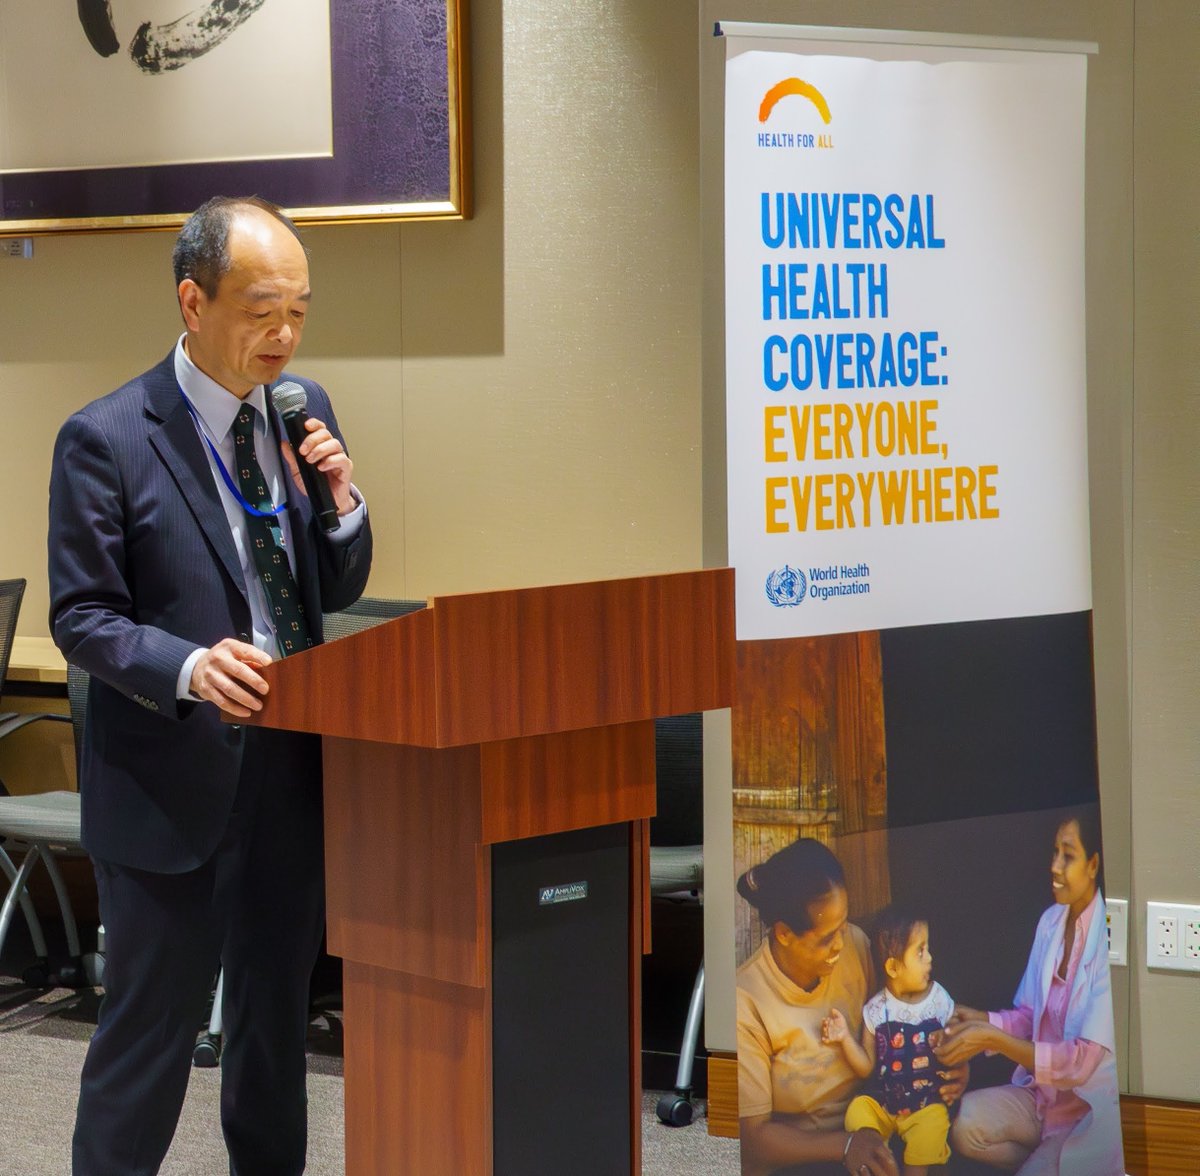 On Dec 12th, we co-hosted a reception celebrating #UHCDaywith @GeorgiaUN, @ThailandUN, @WHO & @unfoundation, where we were able to hear diverse voices & perspectives essential for accelerating progress towards #UHC. Read Amb YAMANAKA's Welcome Remarks 👇 un.emb-japan.go.jp/itpr_en/yamana…